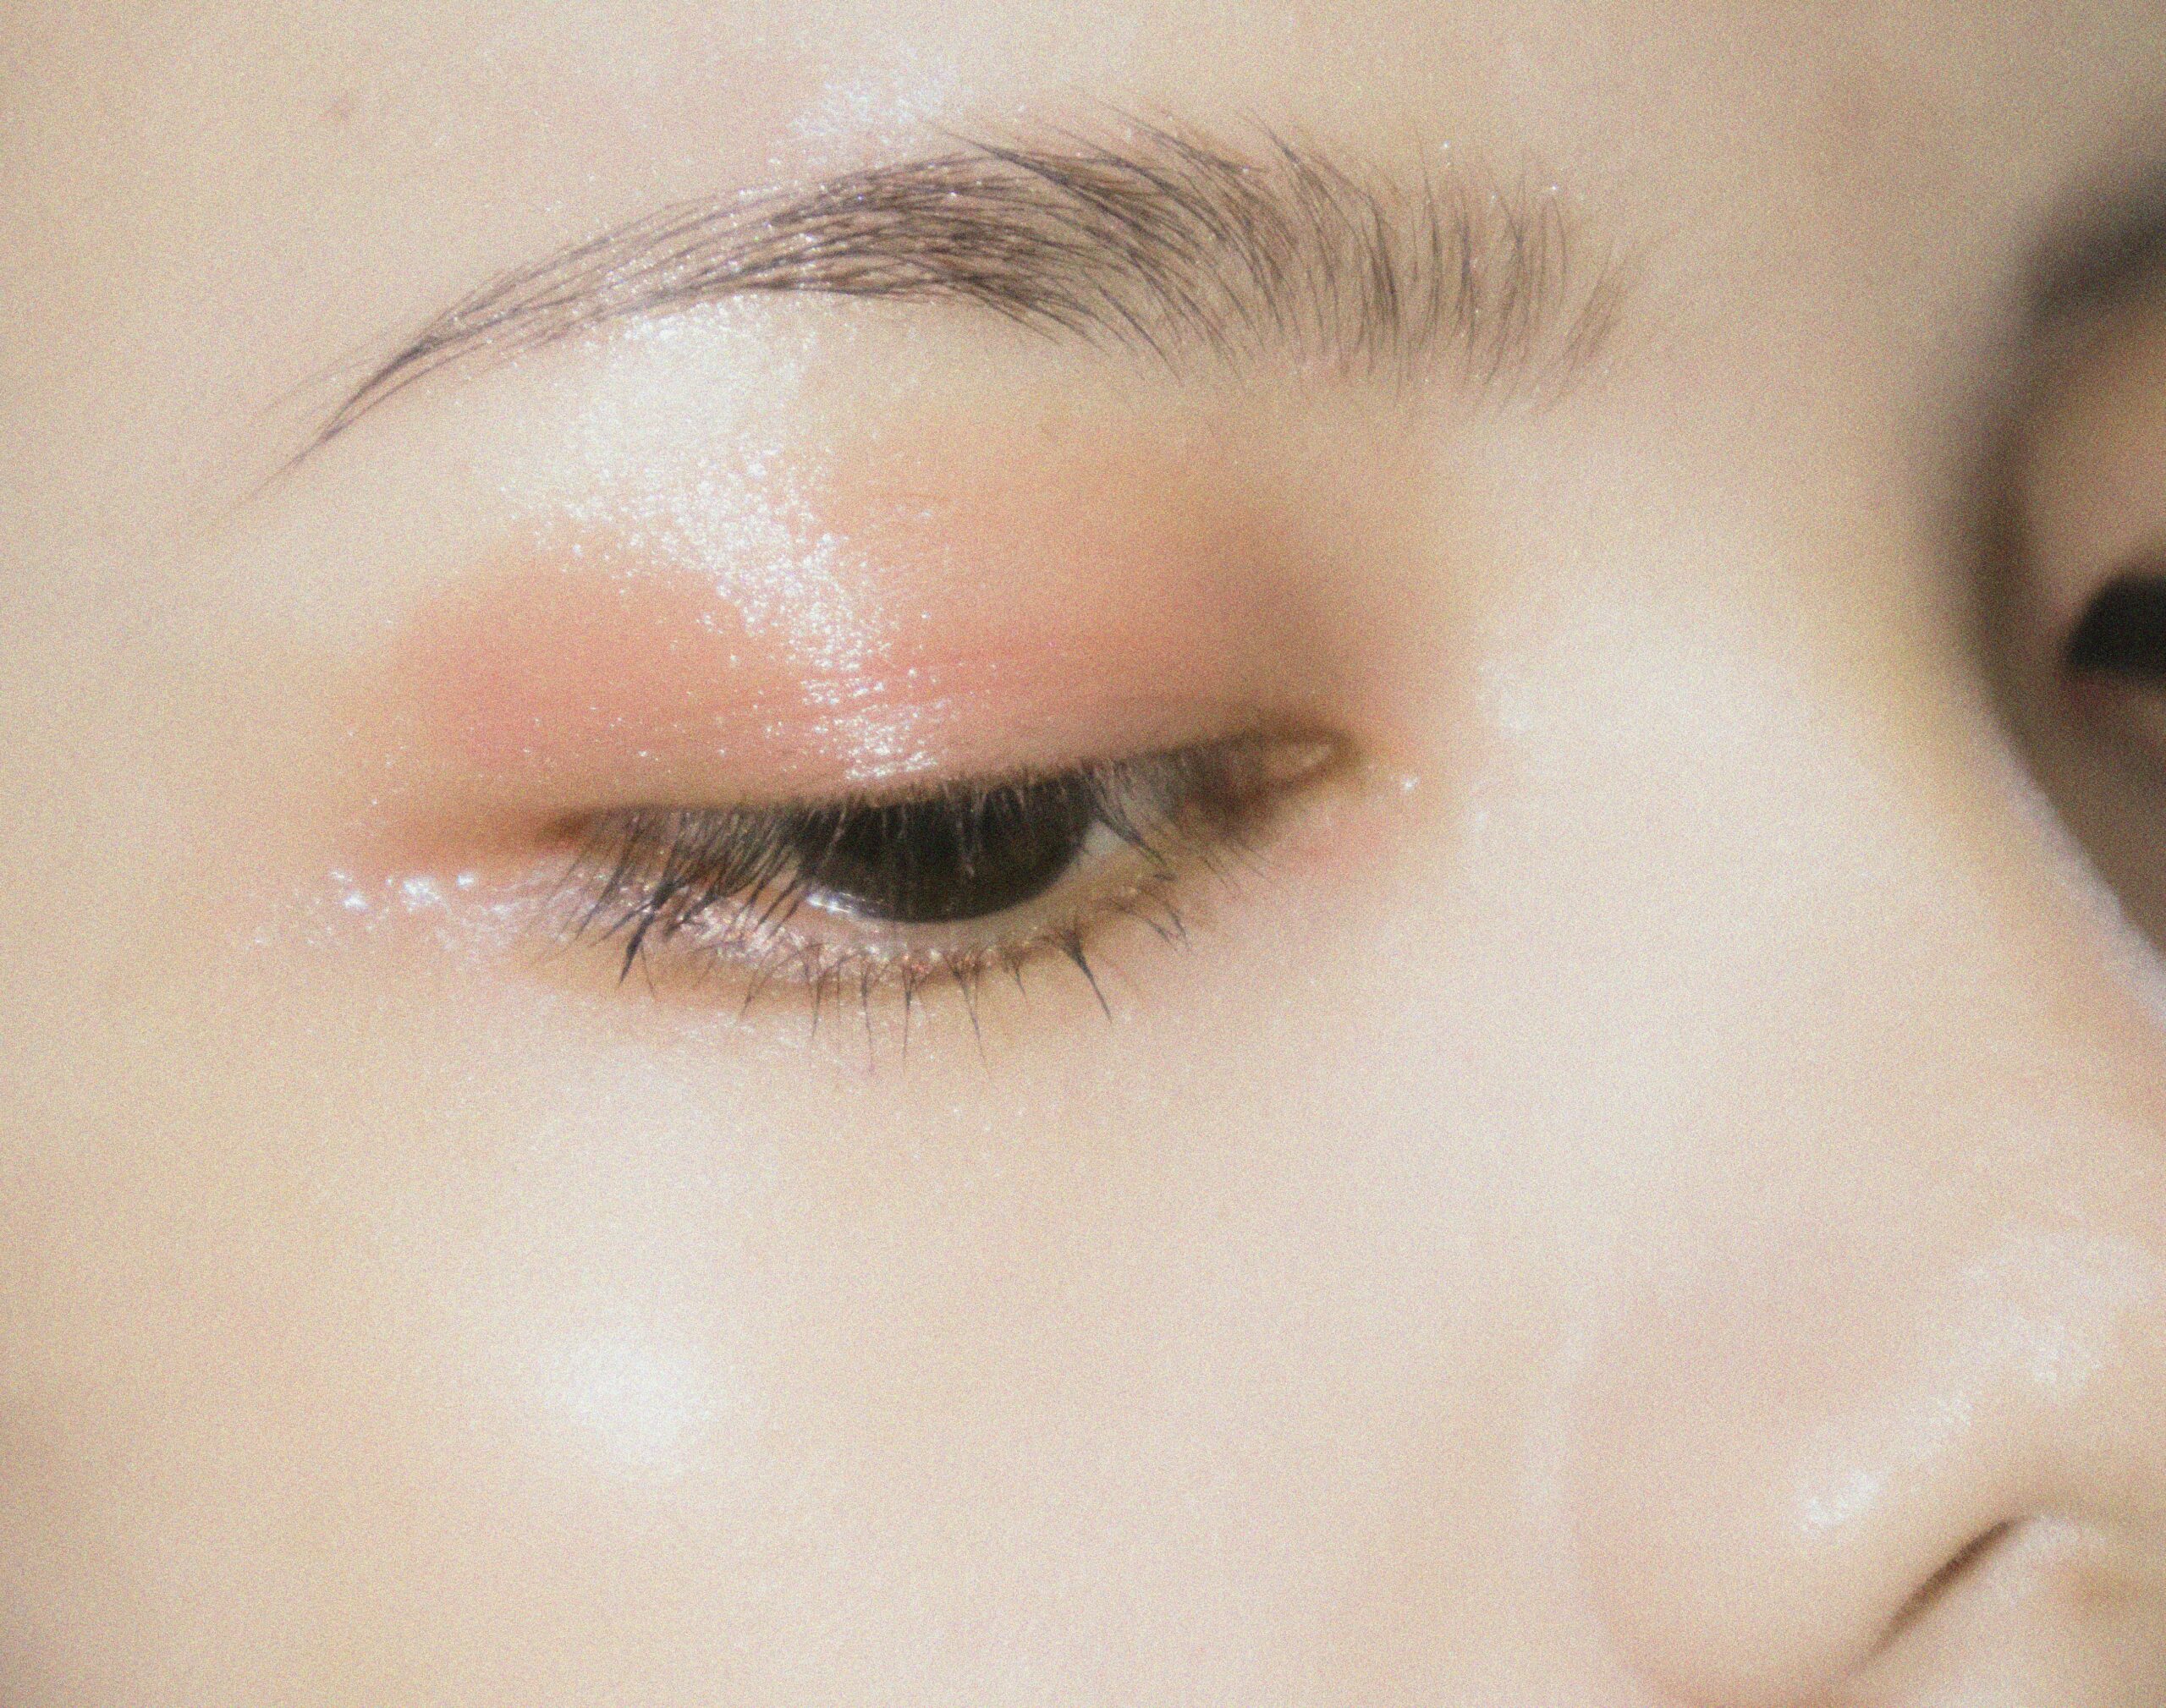 Close-up of an eye, with shimmery pink eye shadow and mascara